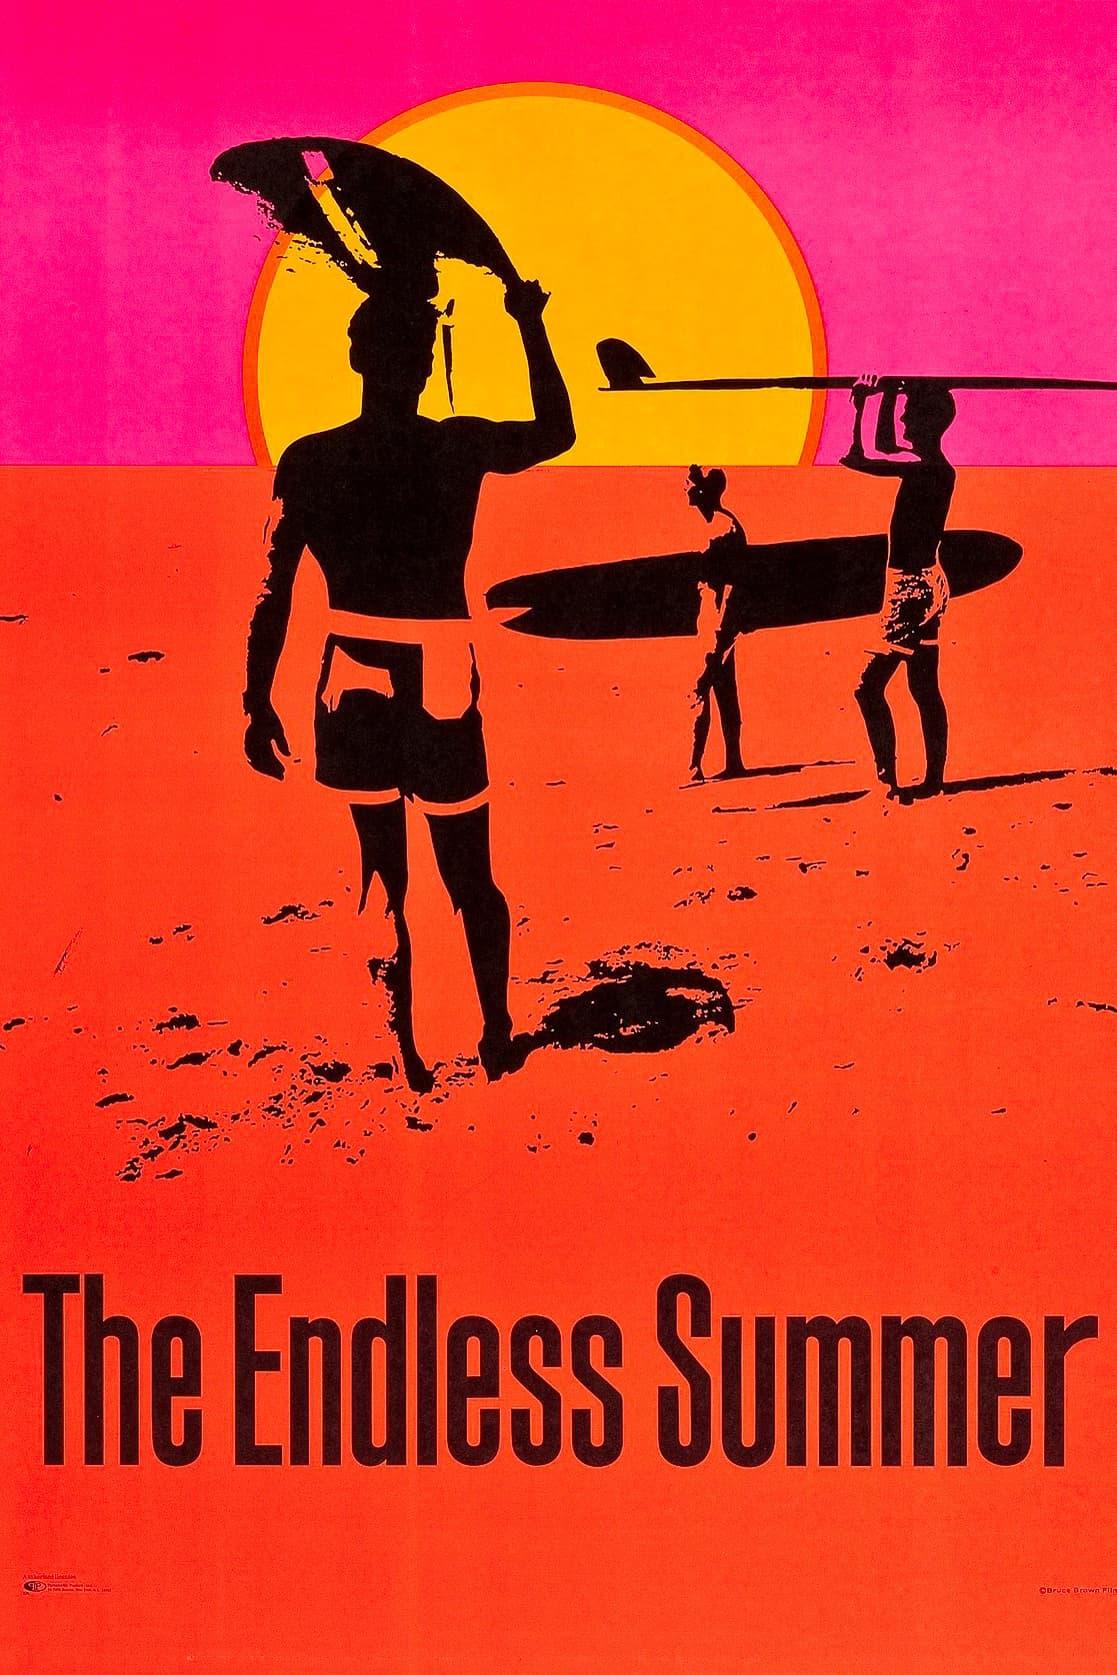 The Endless Summer poster